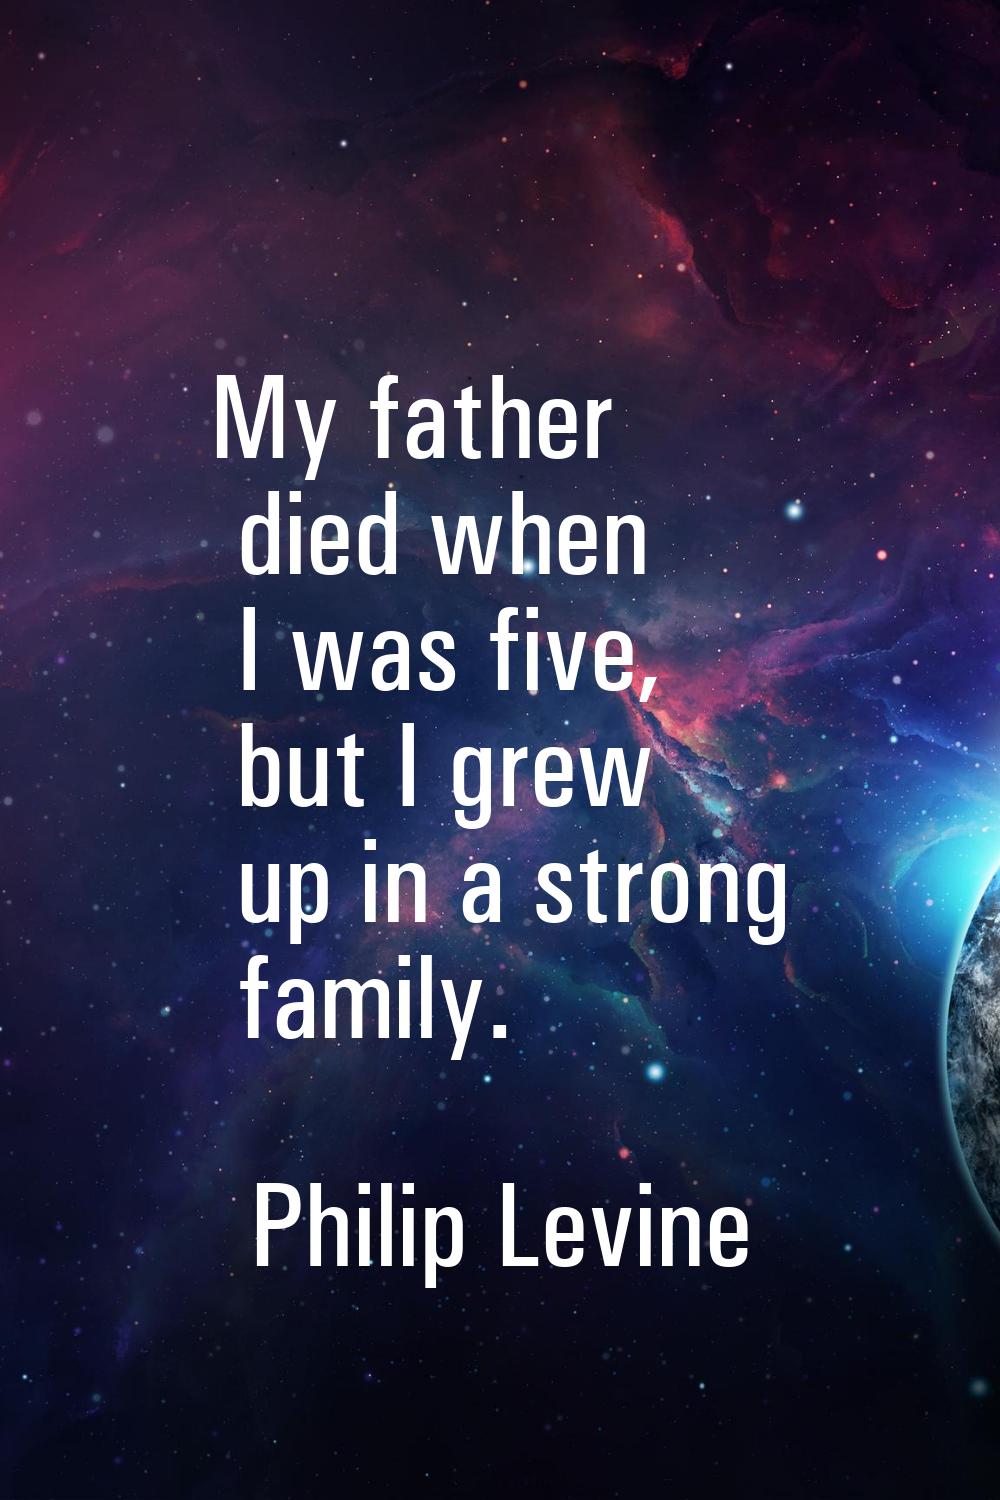 My father died when I was five, but I grew up in a strong family.